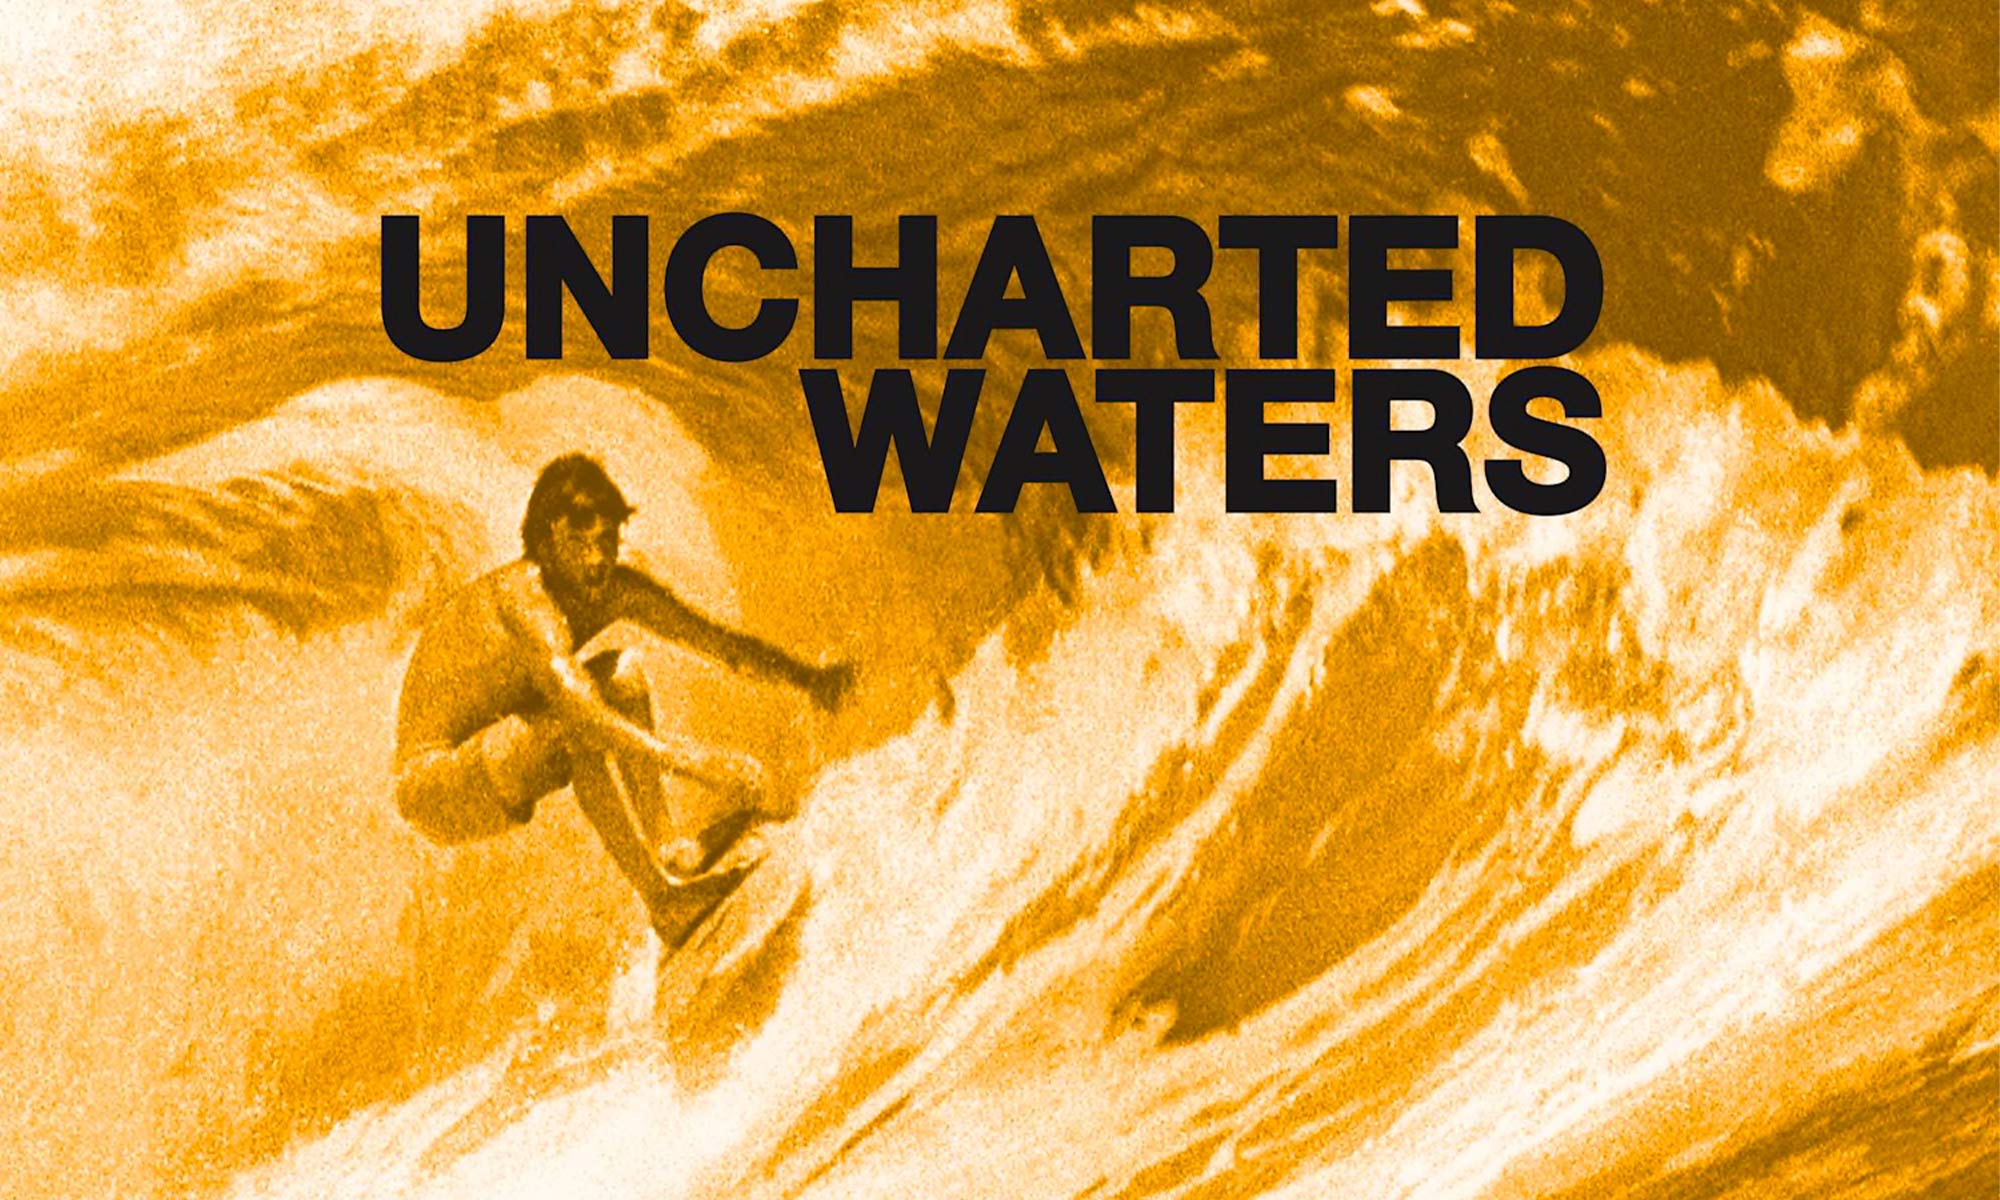 Uncharted water